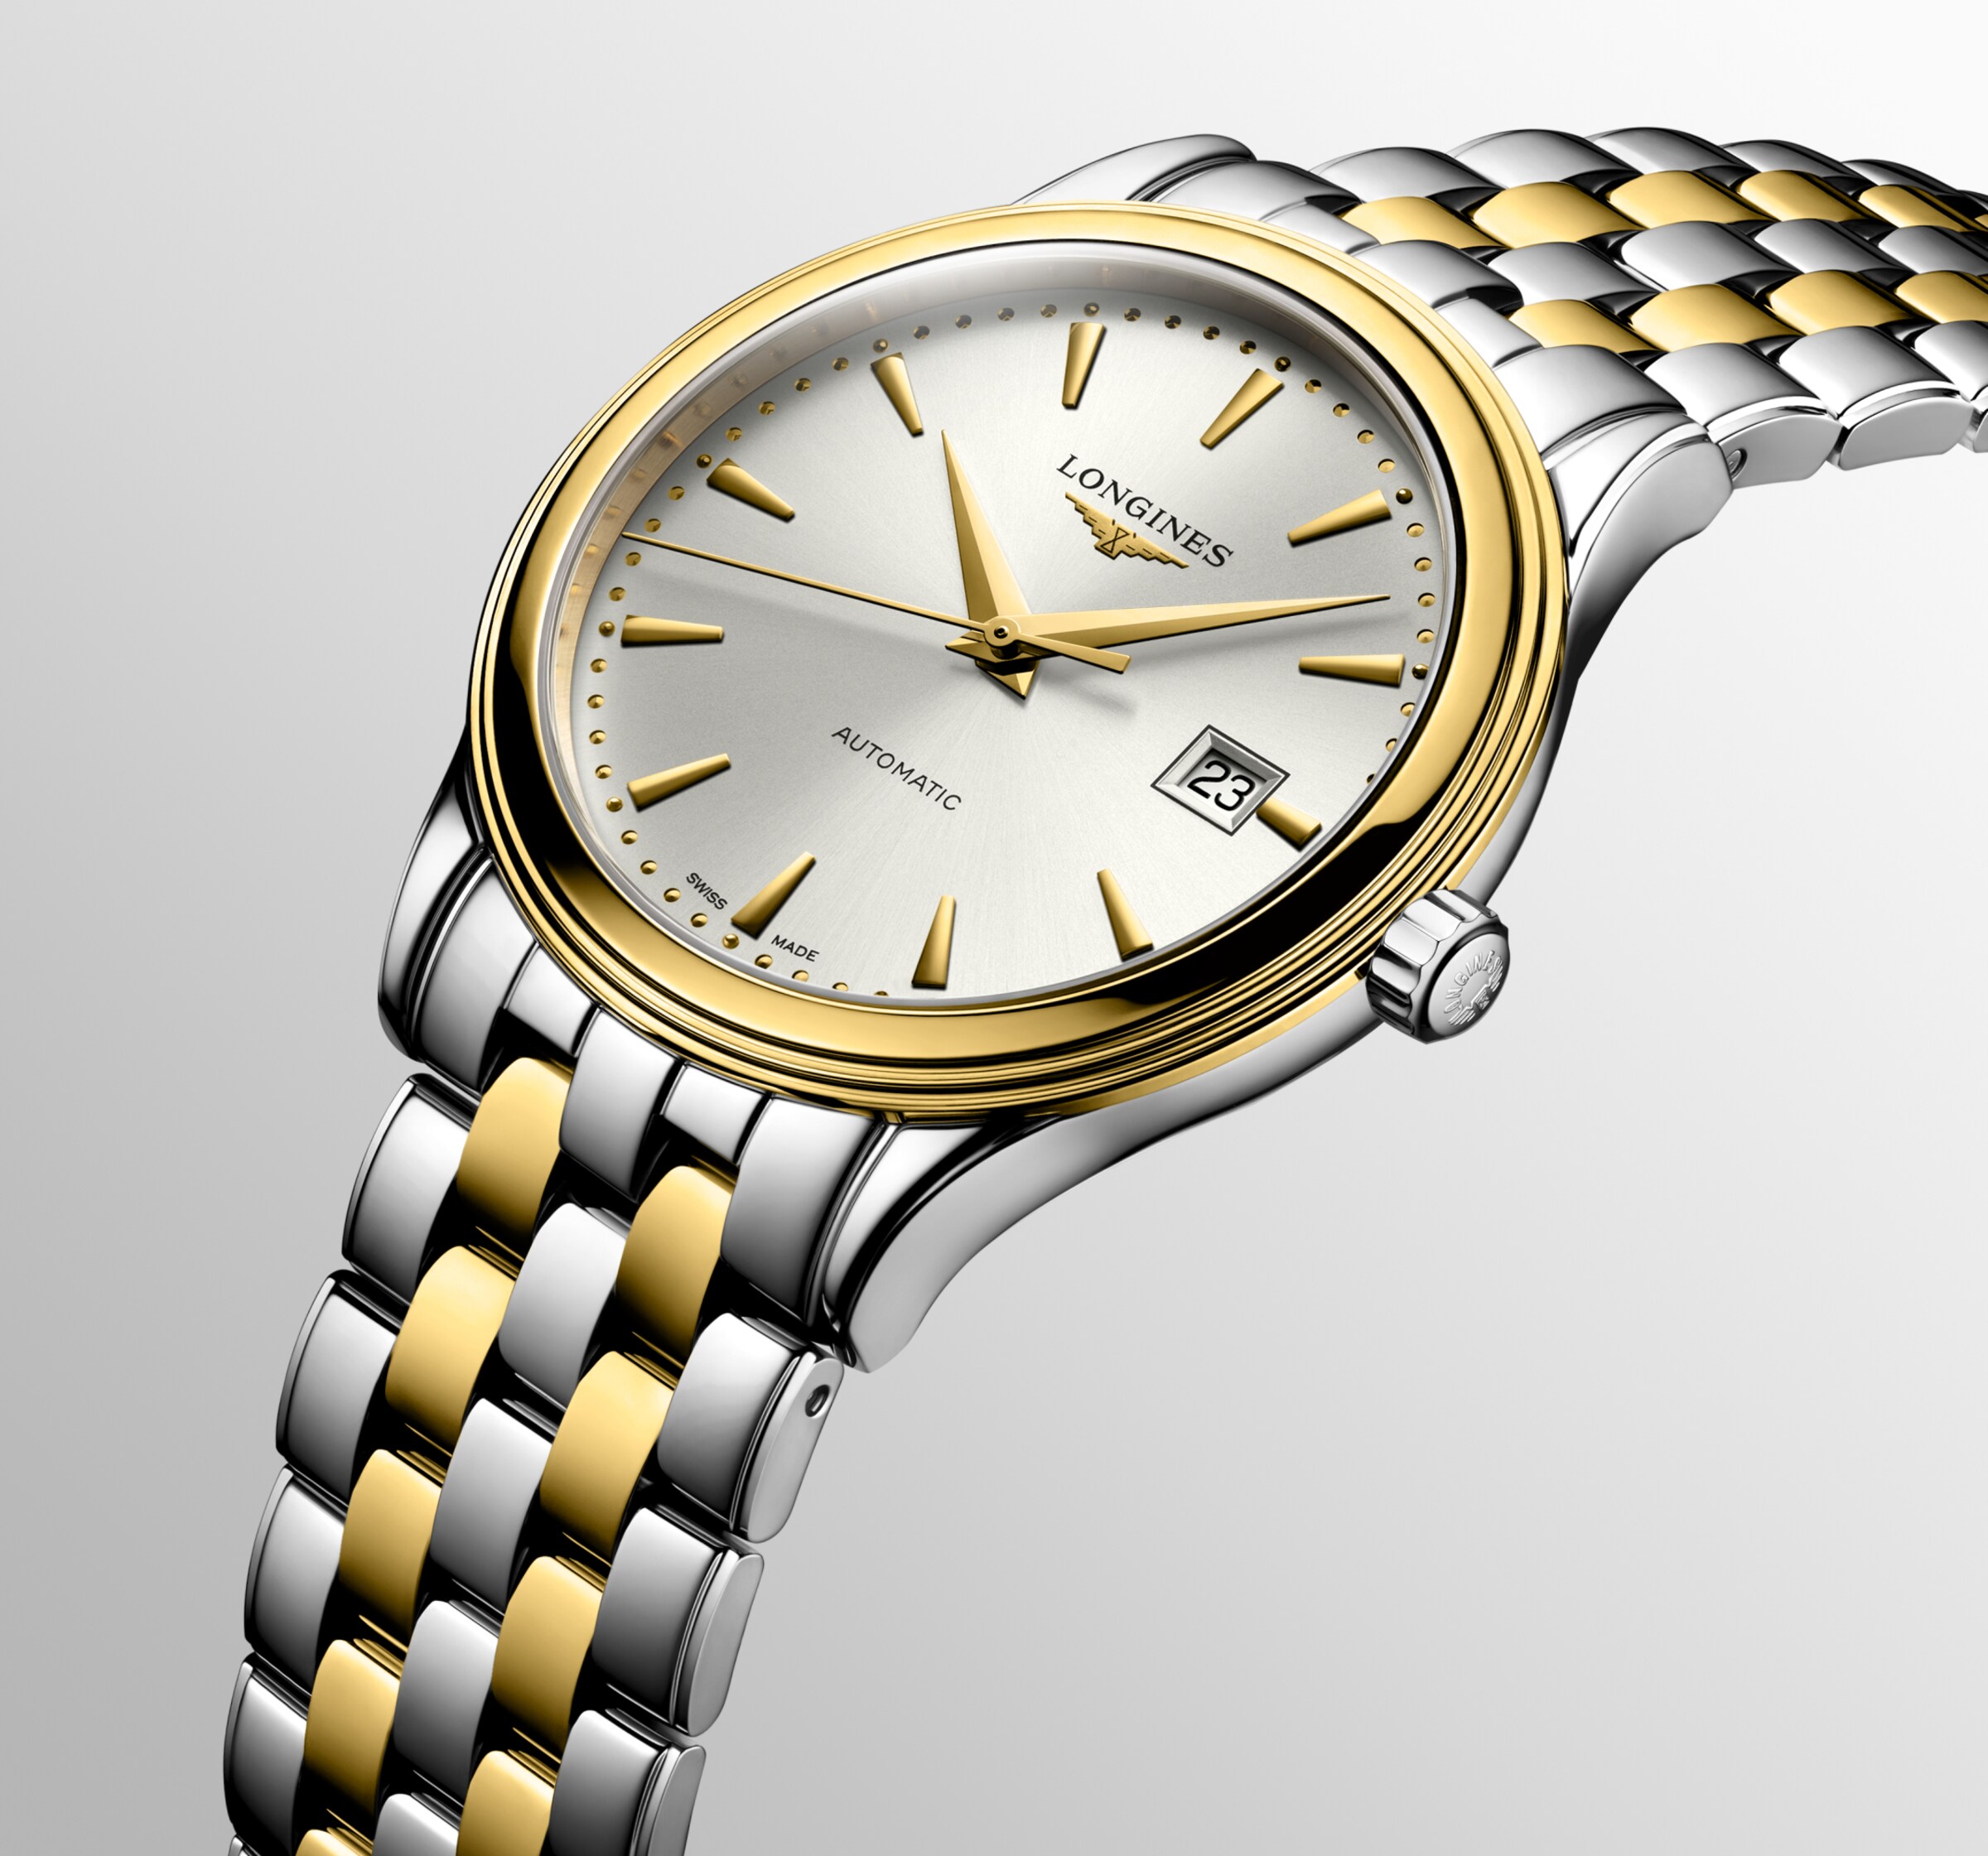 Longines FLAGSHIP Automatic Stainless steel and yellow PVD coating Watch - L4.984.3.79.7